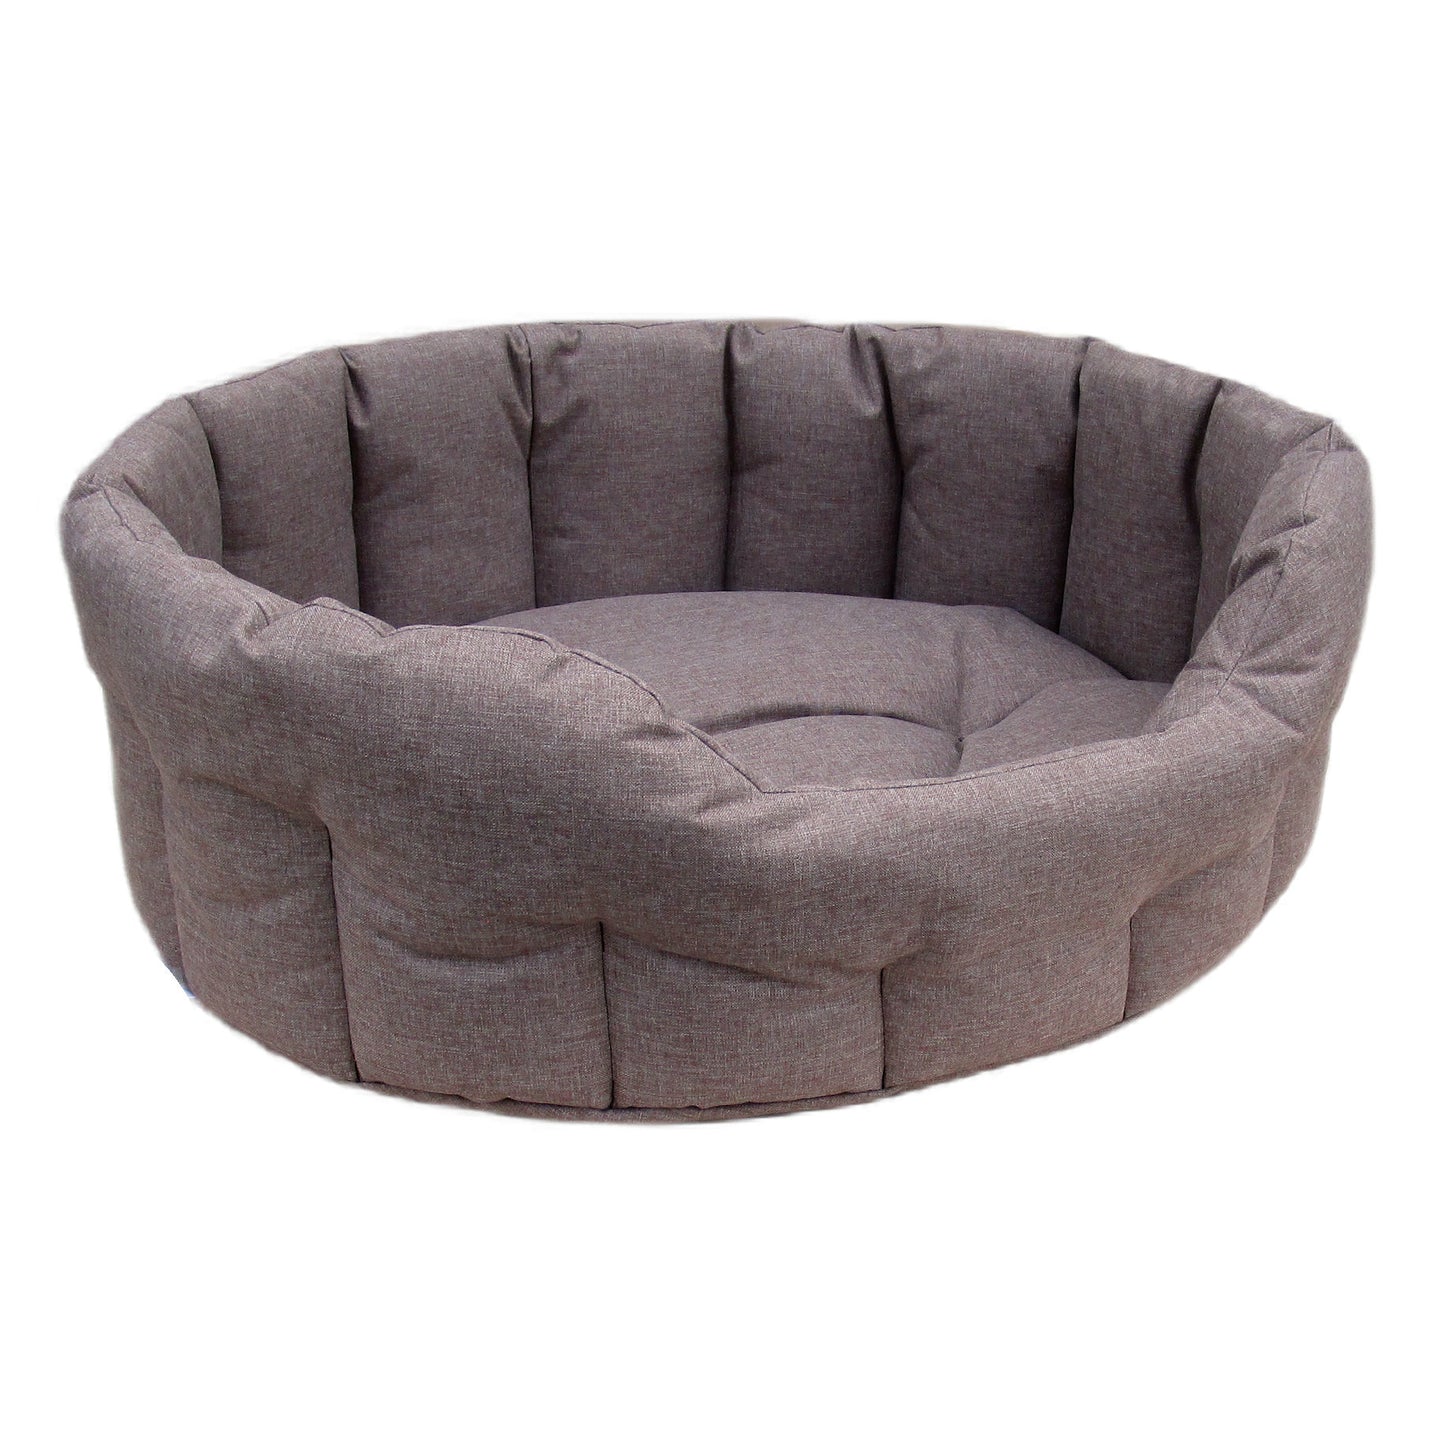 P&L Country Dog Heavy Duty Oval Drop Fronted Waterproof Softee Dog Bed